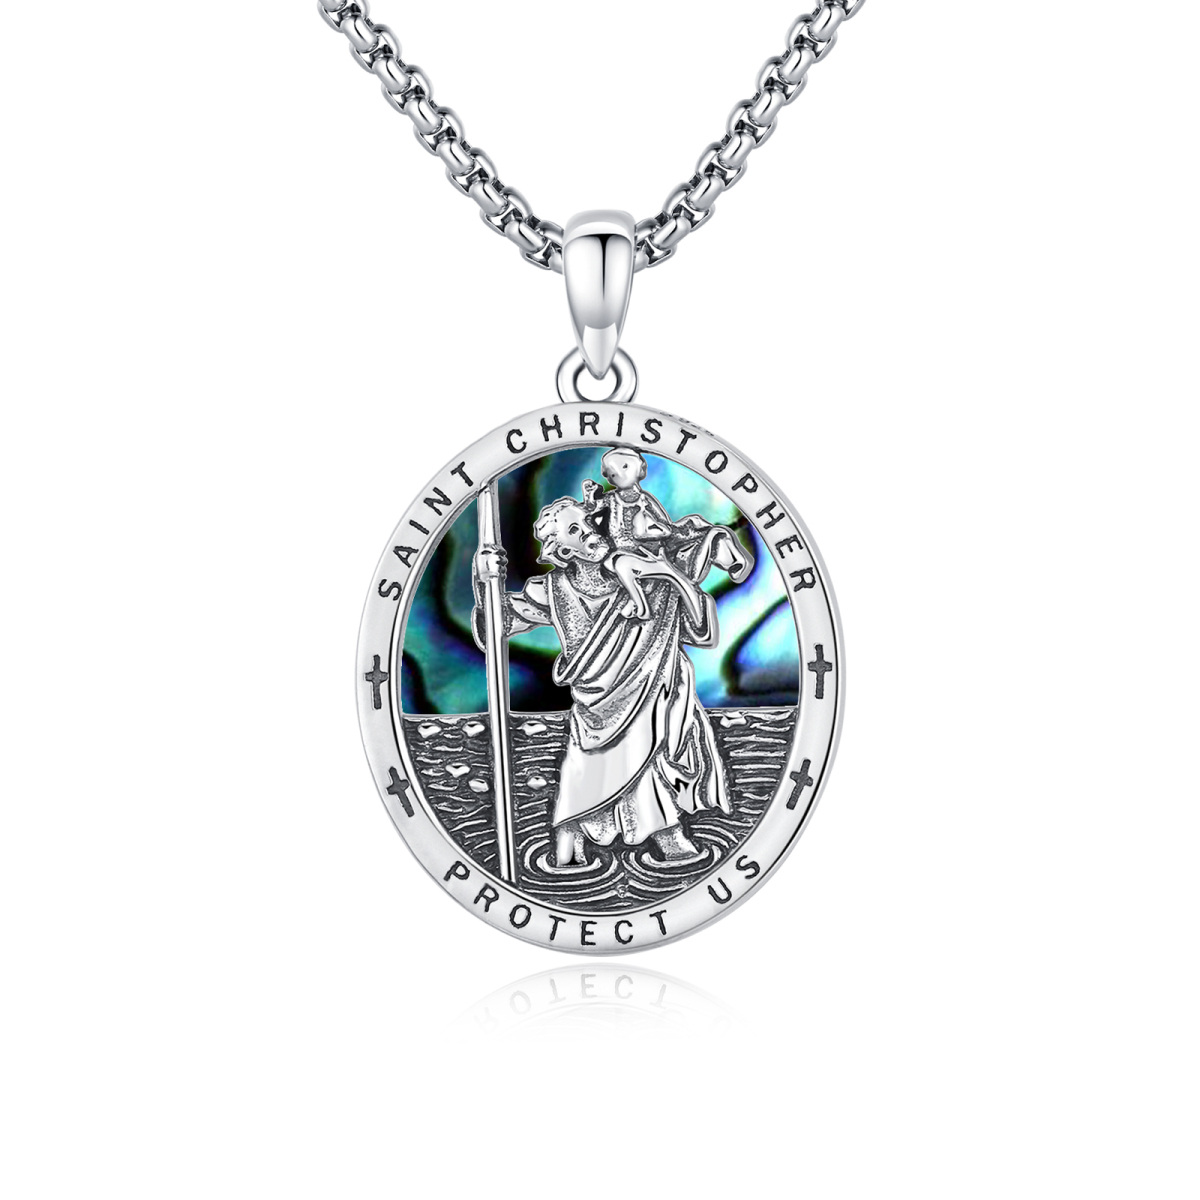 Sterling Silver Abalone Shellfish Saint Christopher Pendant Necklace with Engraved Word-1